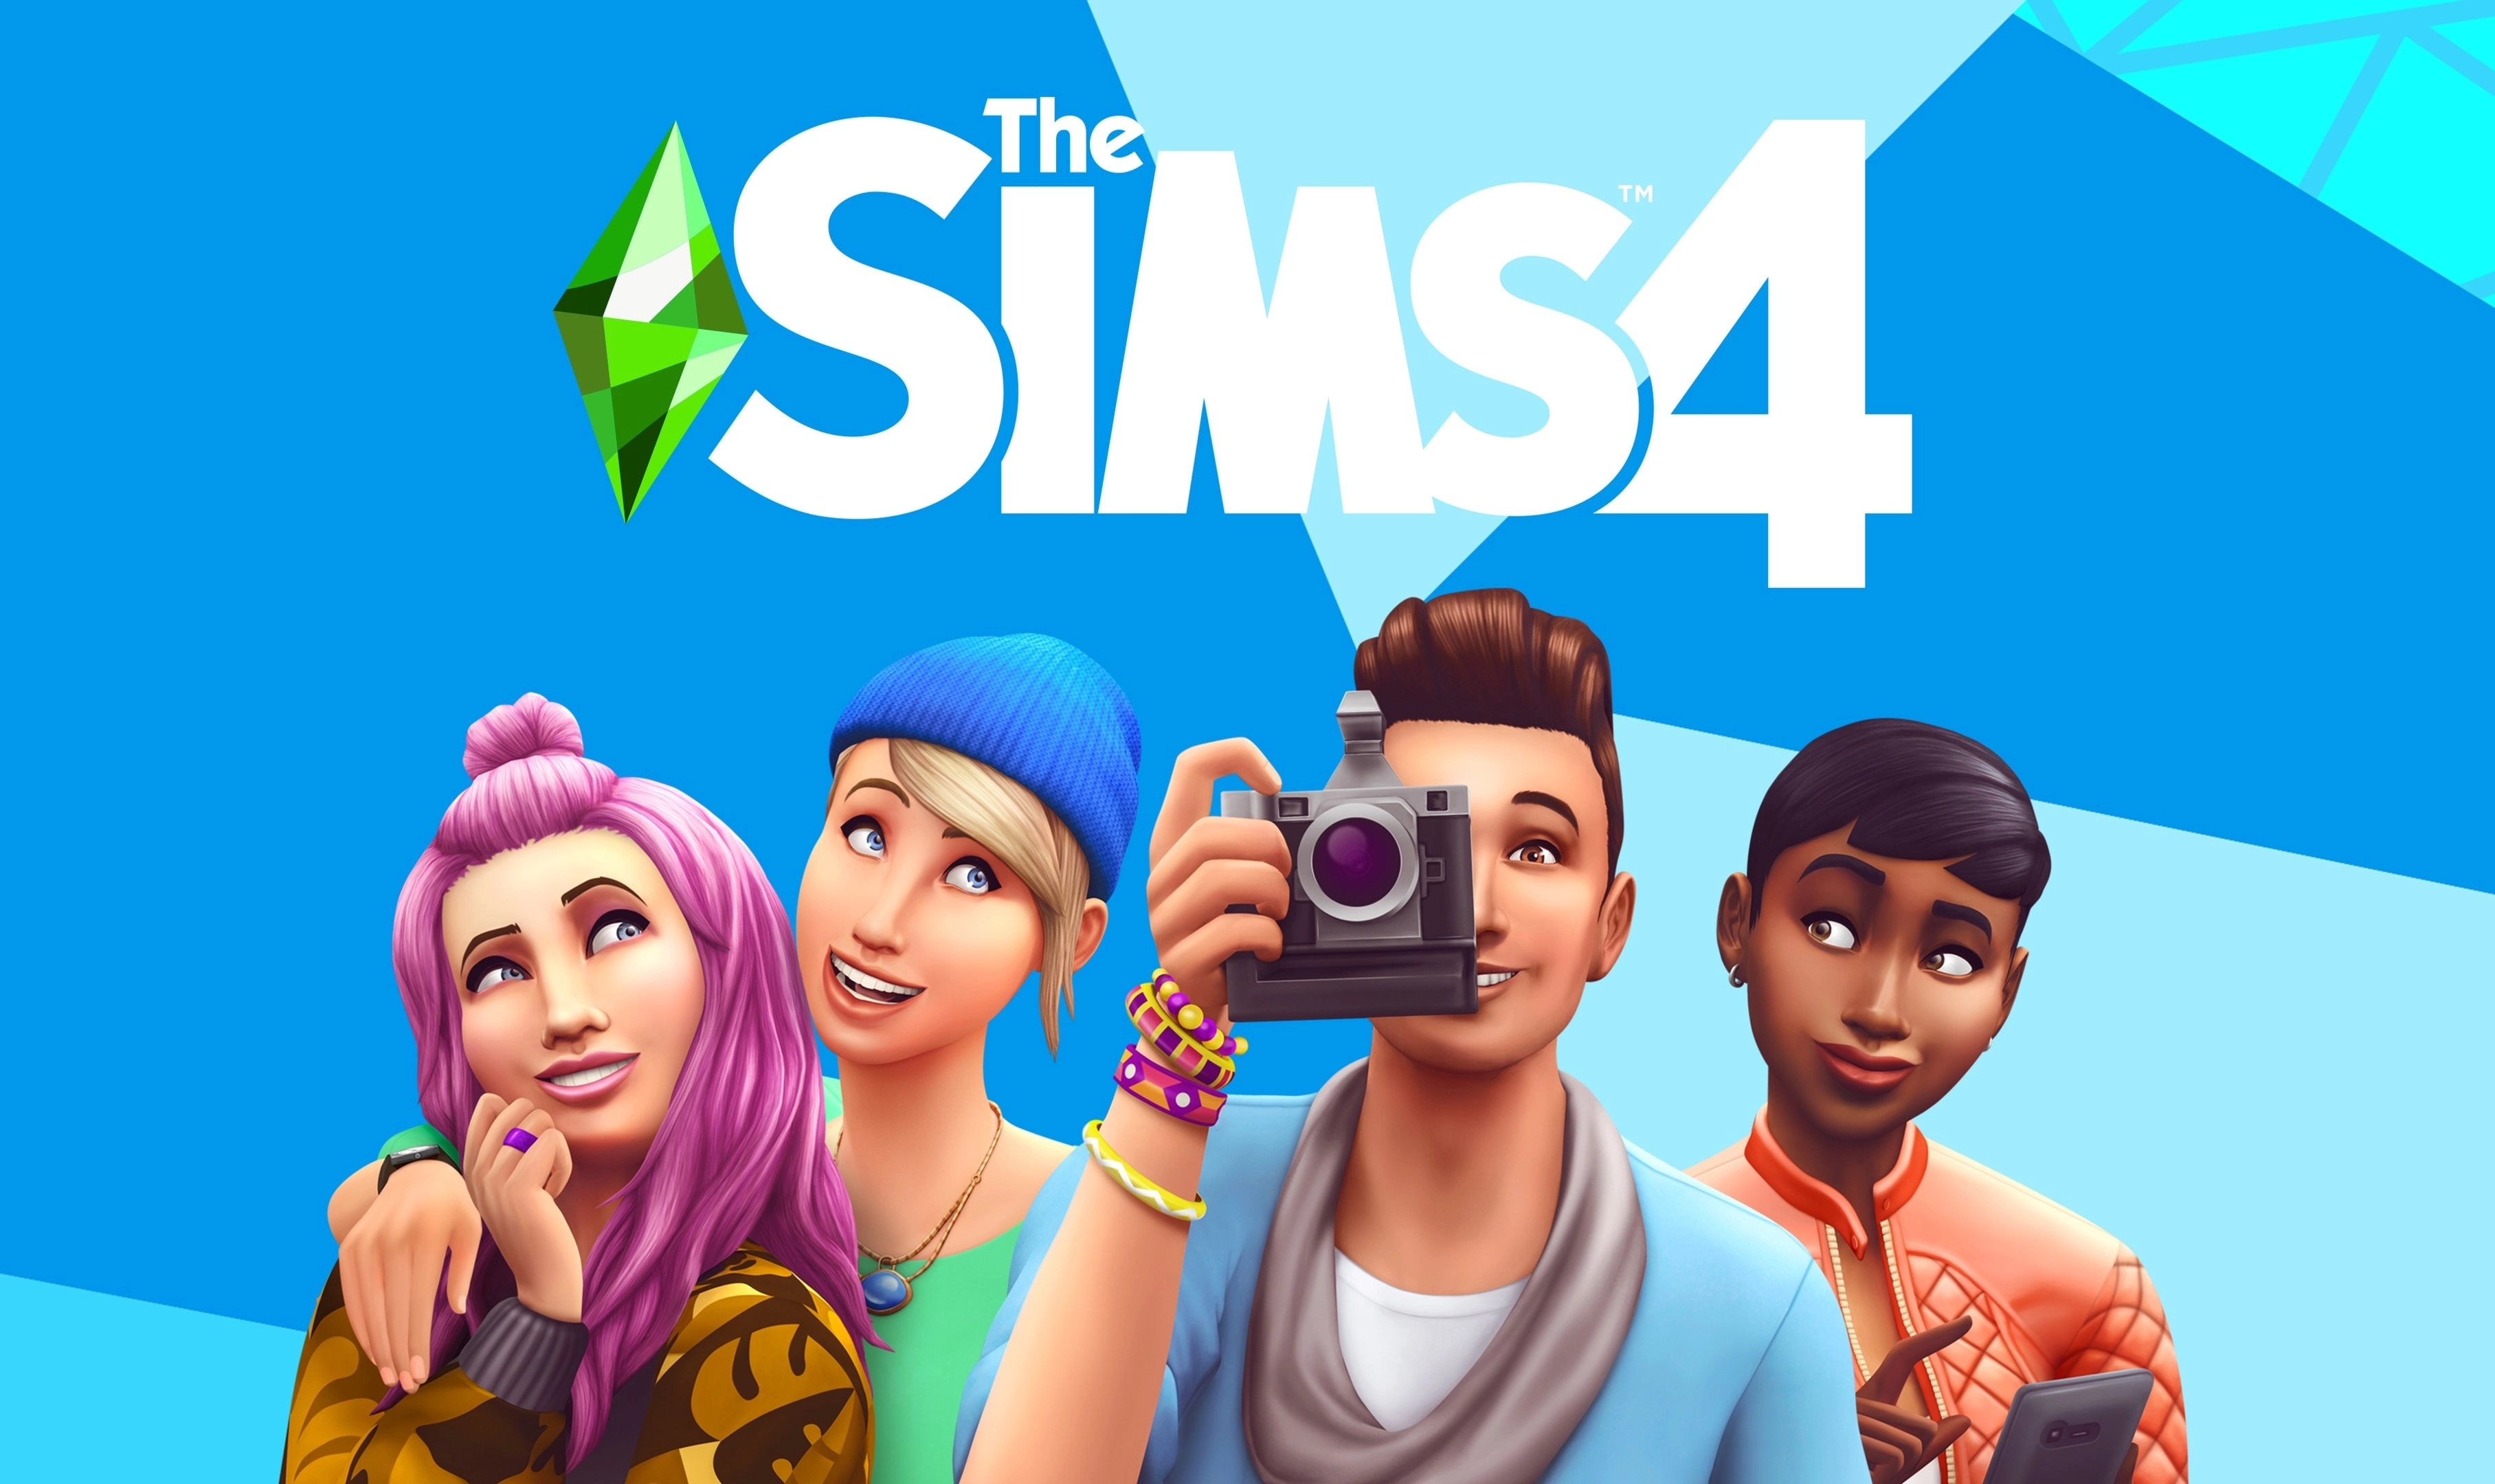 Play The Sims™ FreePlay Online for Free on PC & Mobile